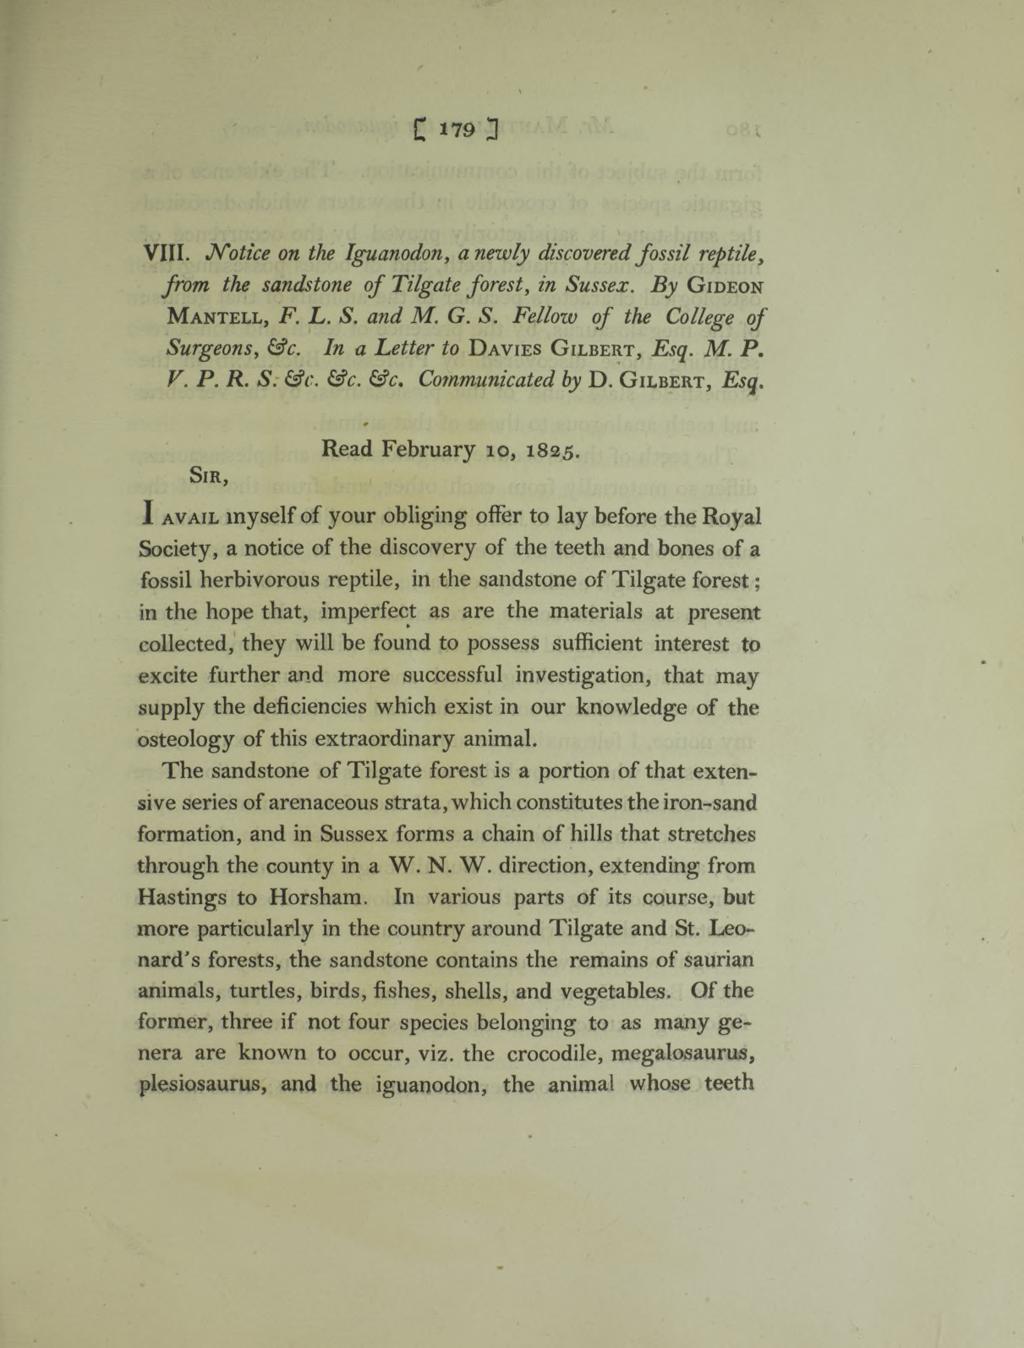 C 1TO 3 VIII. Notice on the Iguanodon, a newly discovered fossil, from the sandstone of Tilgate, m Sussex. By G ideon M antell, F. L. 5. and M. G. S. Fellow of the College of Surgeons, In a Letter to D avies G ilbert, Esq.